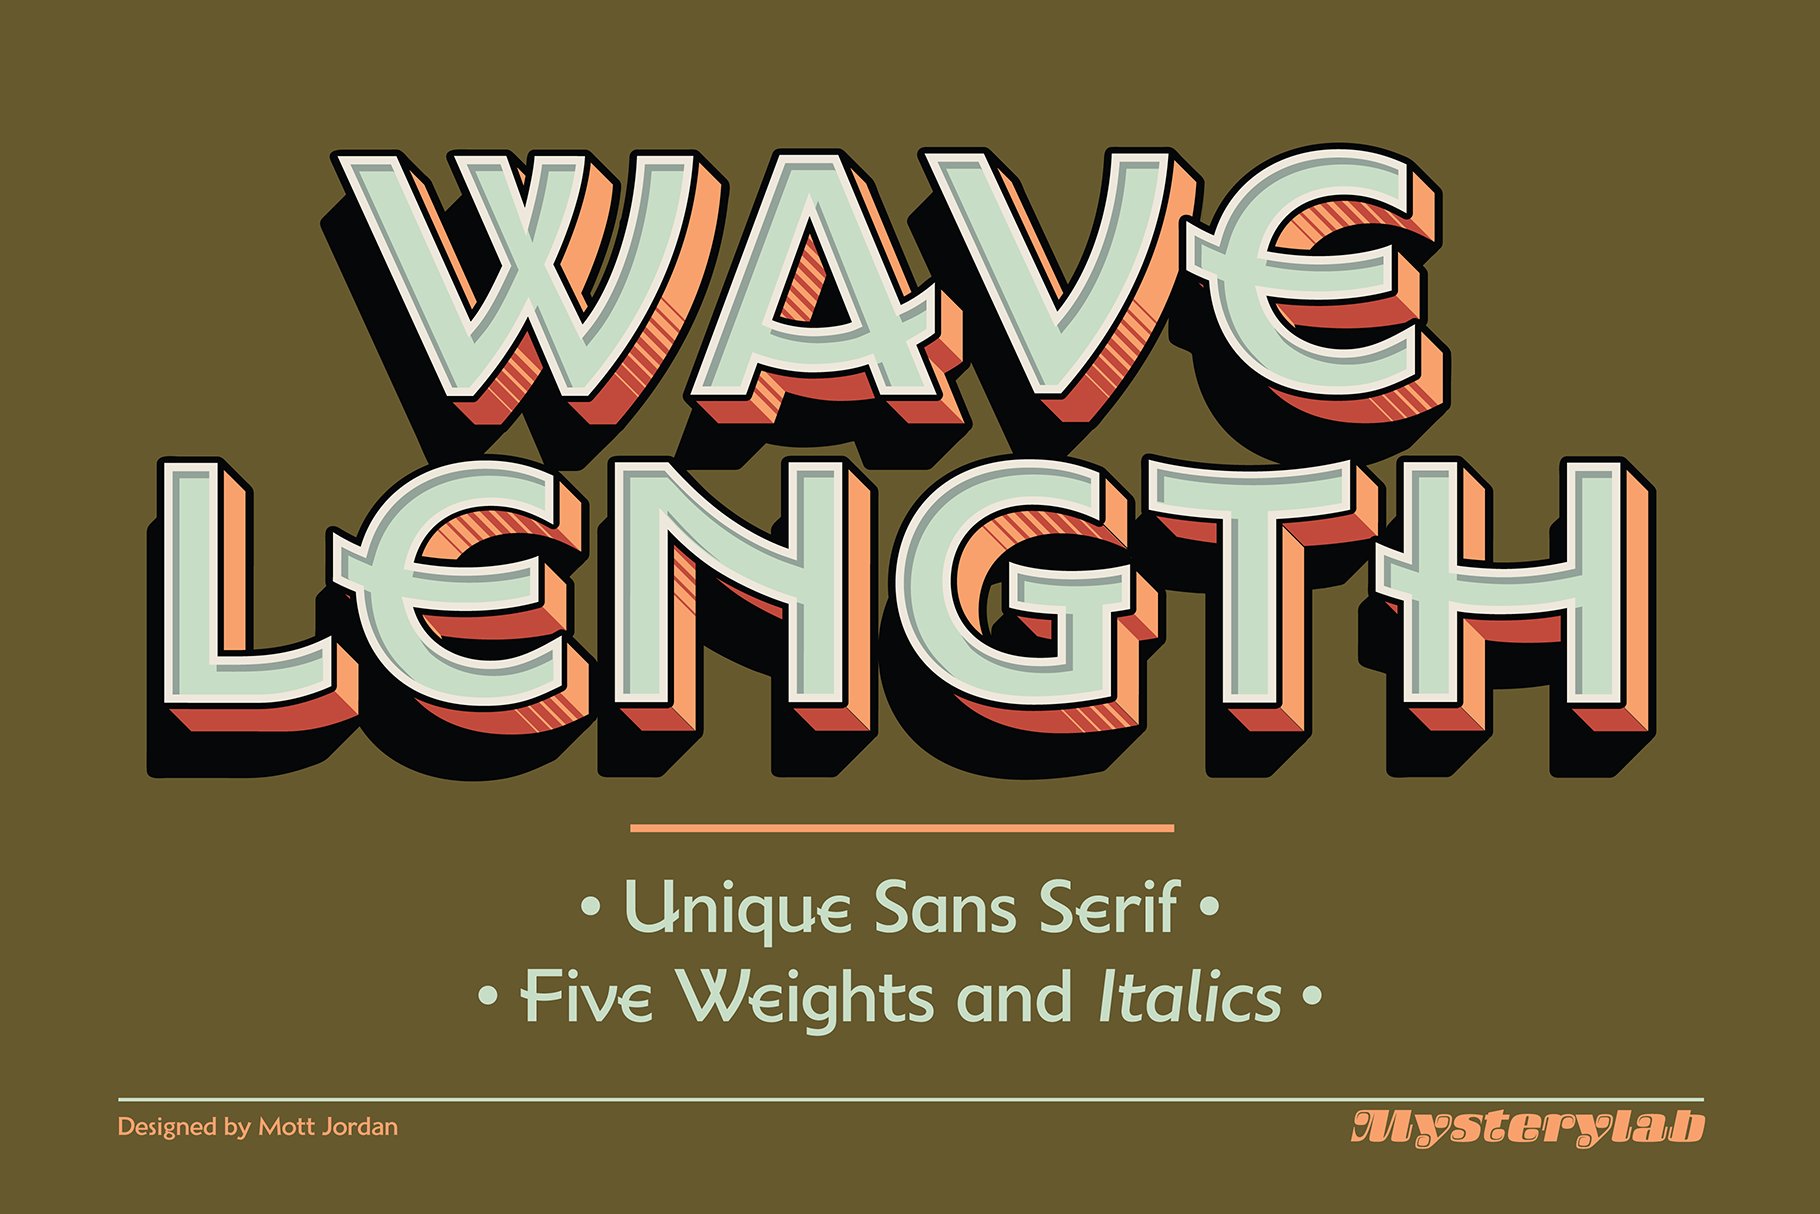 Wavelength Font Family cover image.